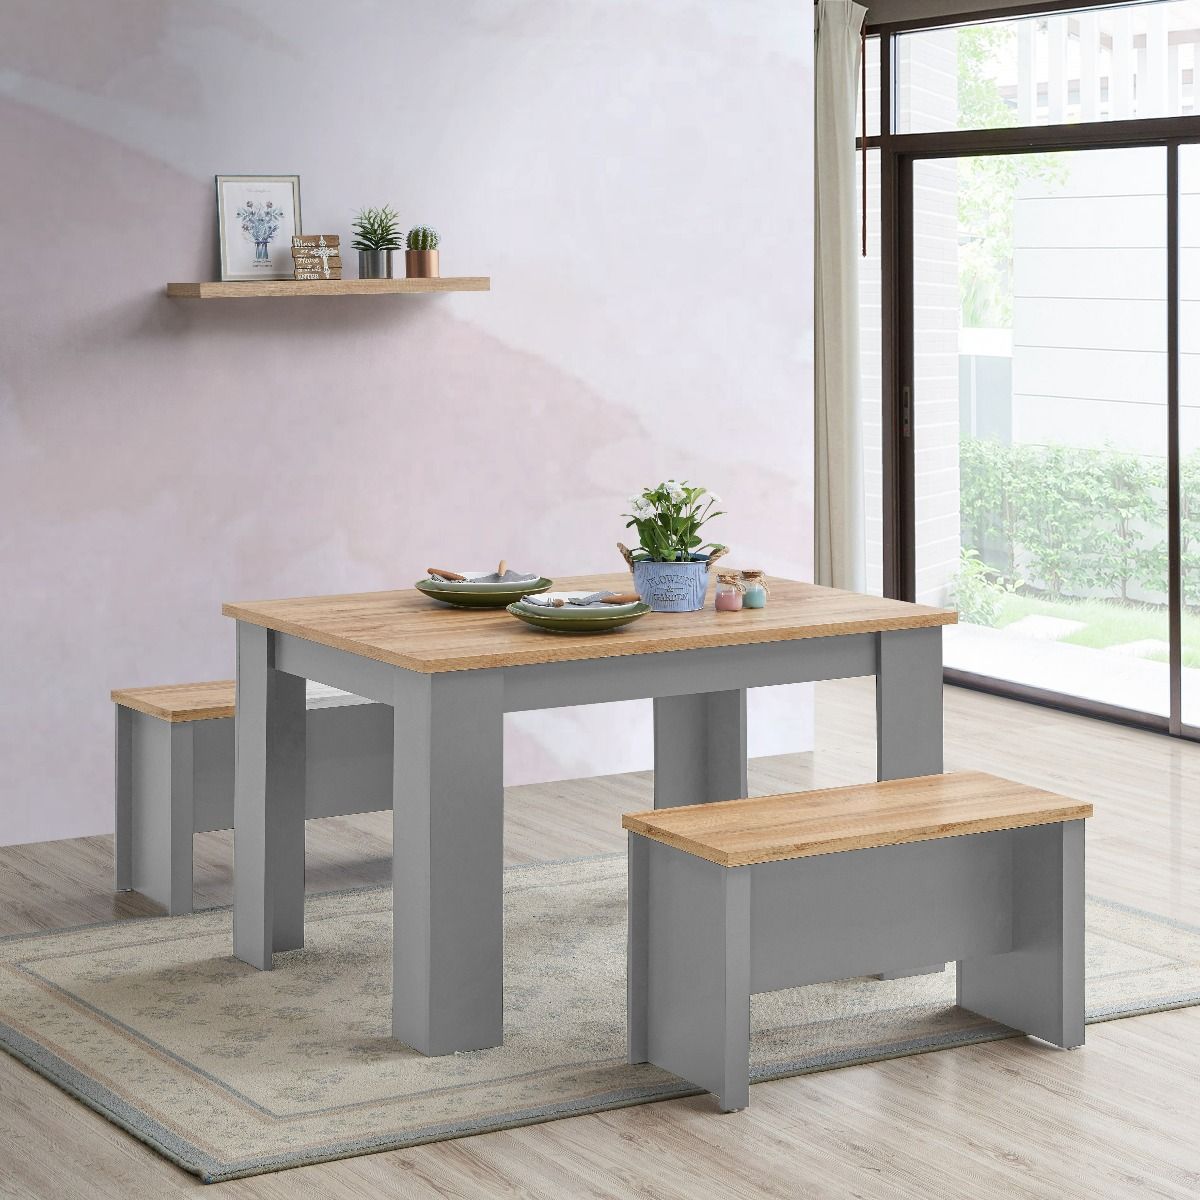 Cisnon Light Grey Dining Table 120 Cm With 2 Benches Light Grey